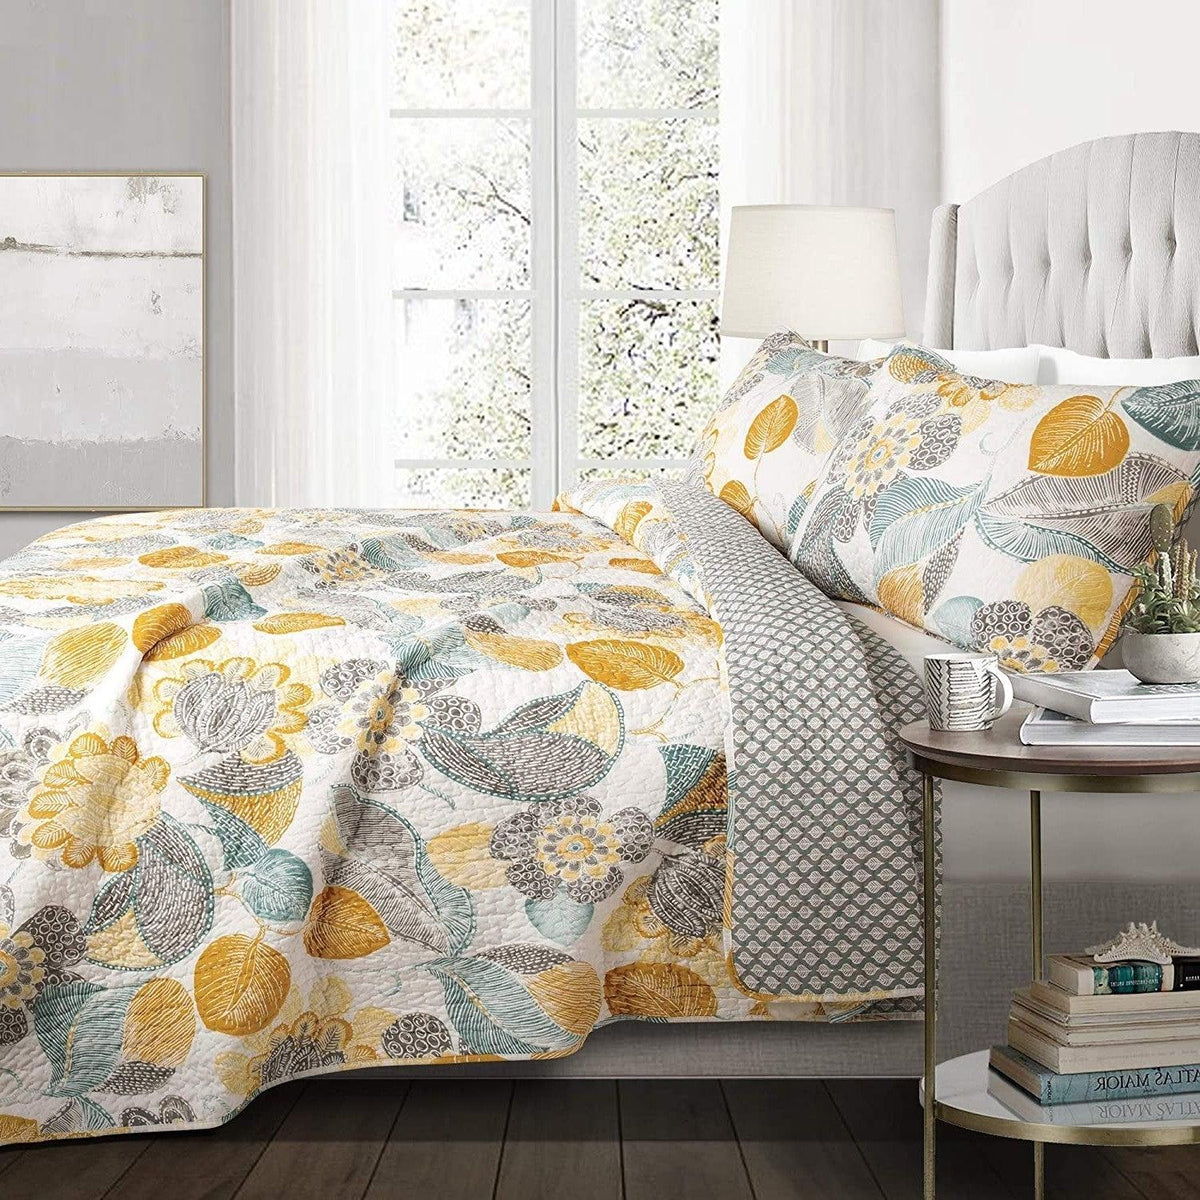 3 Piece Reversible Yellow Grey Floral Cotton Quilt Set in King Size